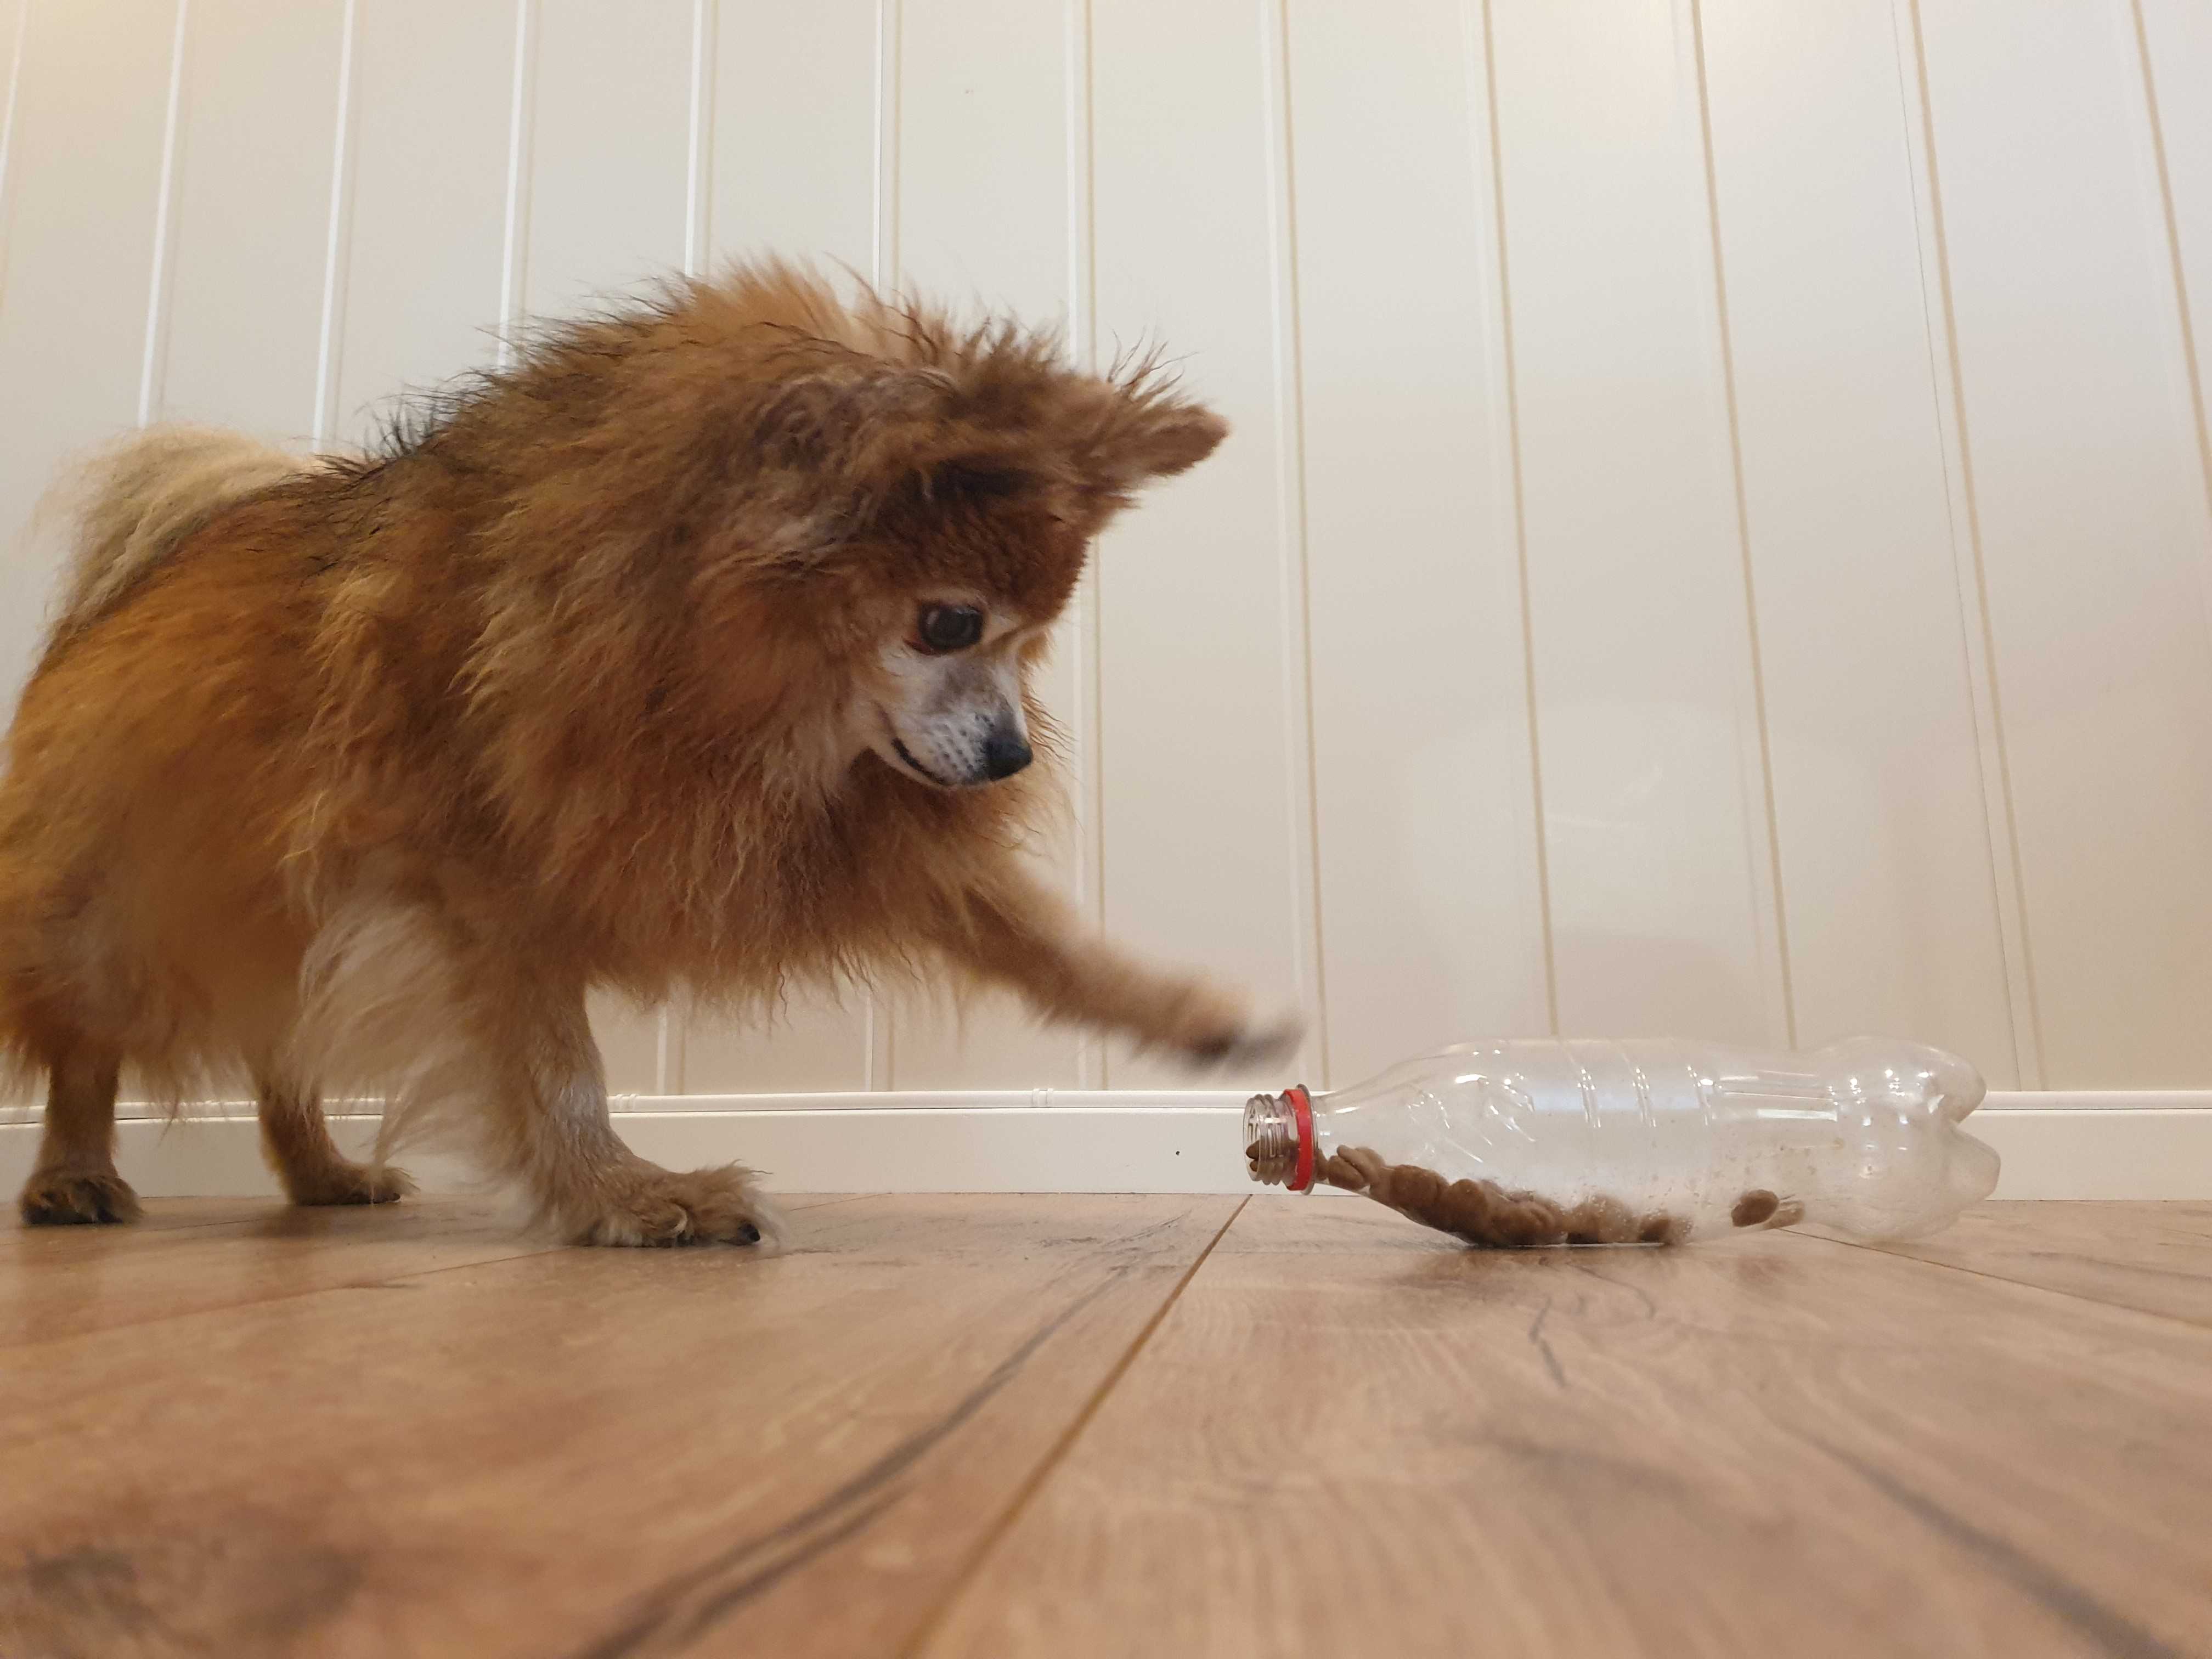 7 homemade games that stimulate your dog mentally